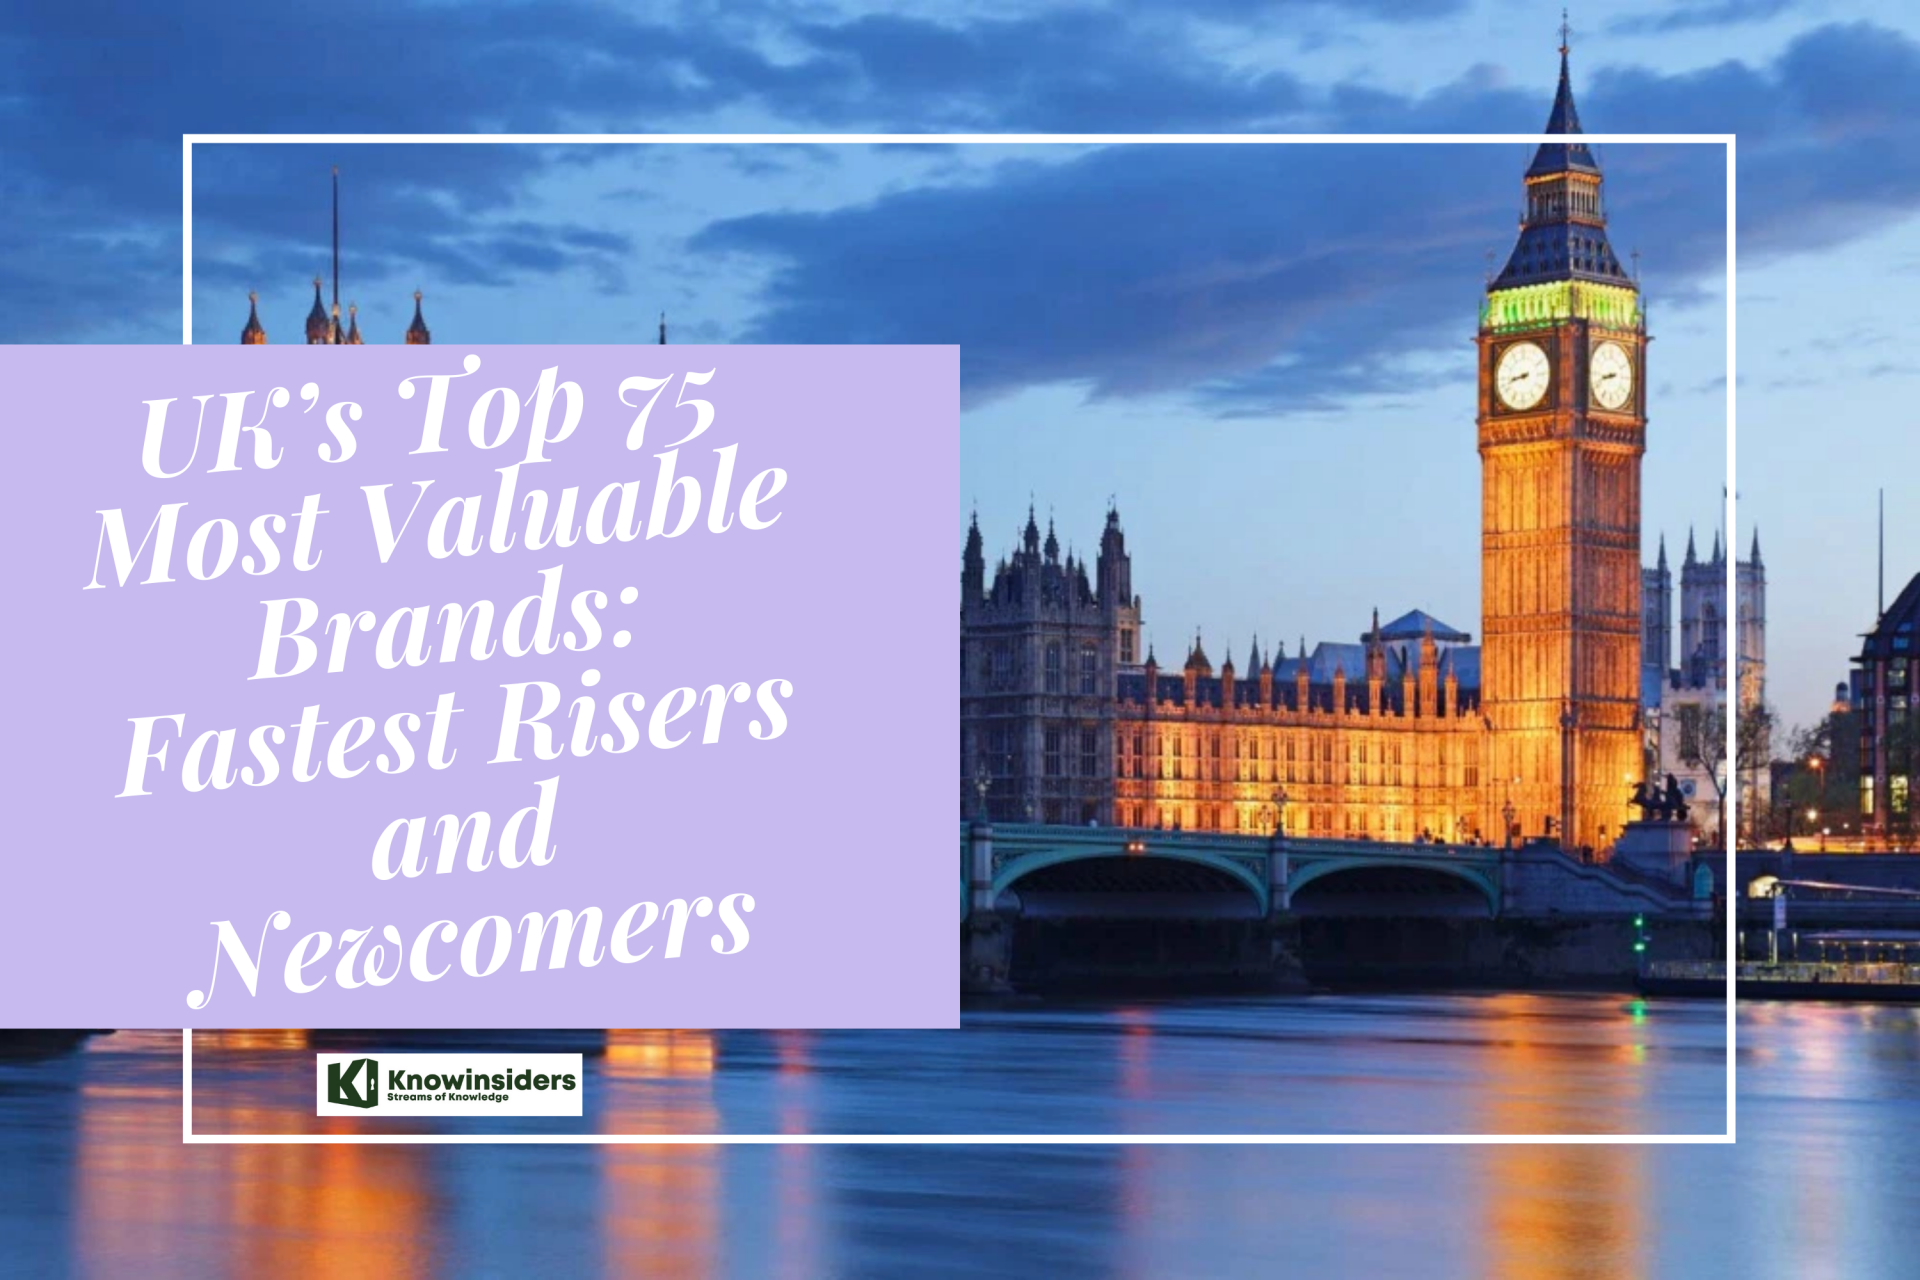 uks top 75 most valuable brands fastest risers and newcomers